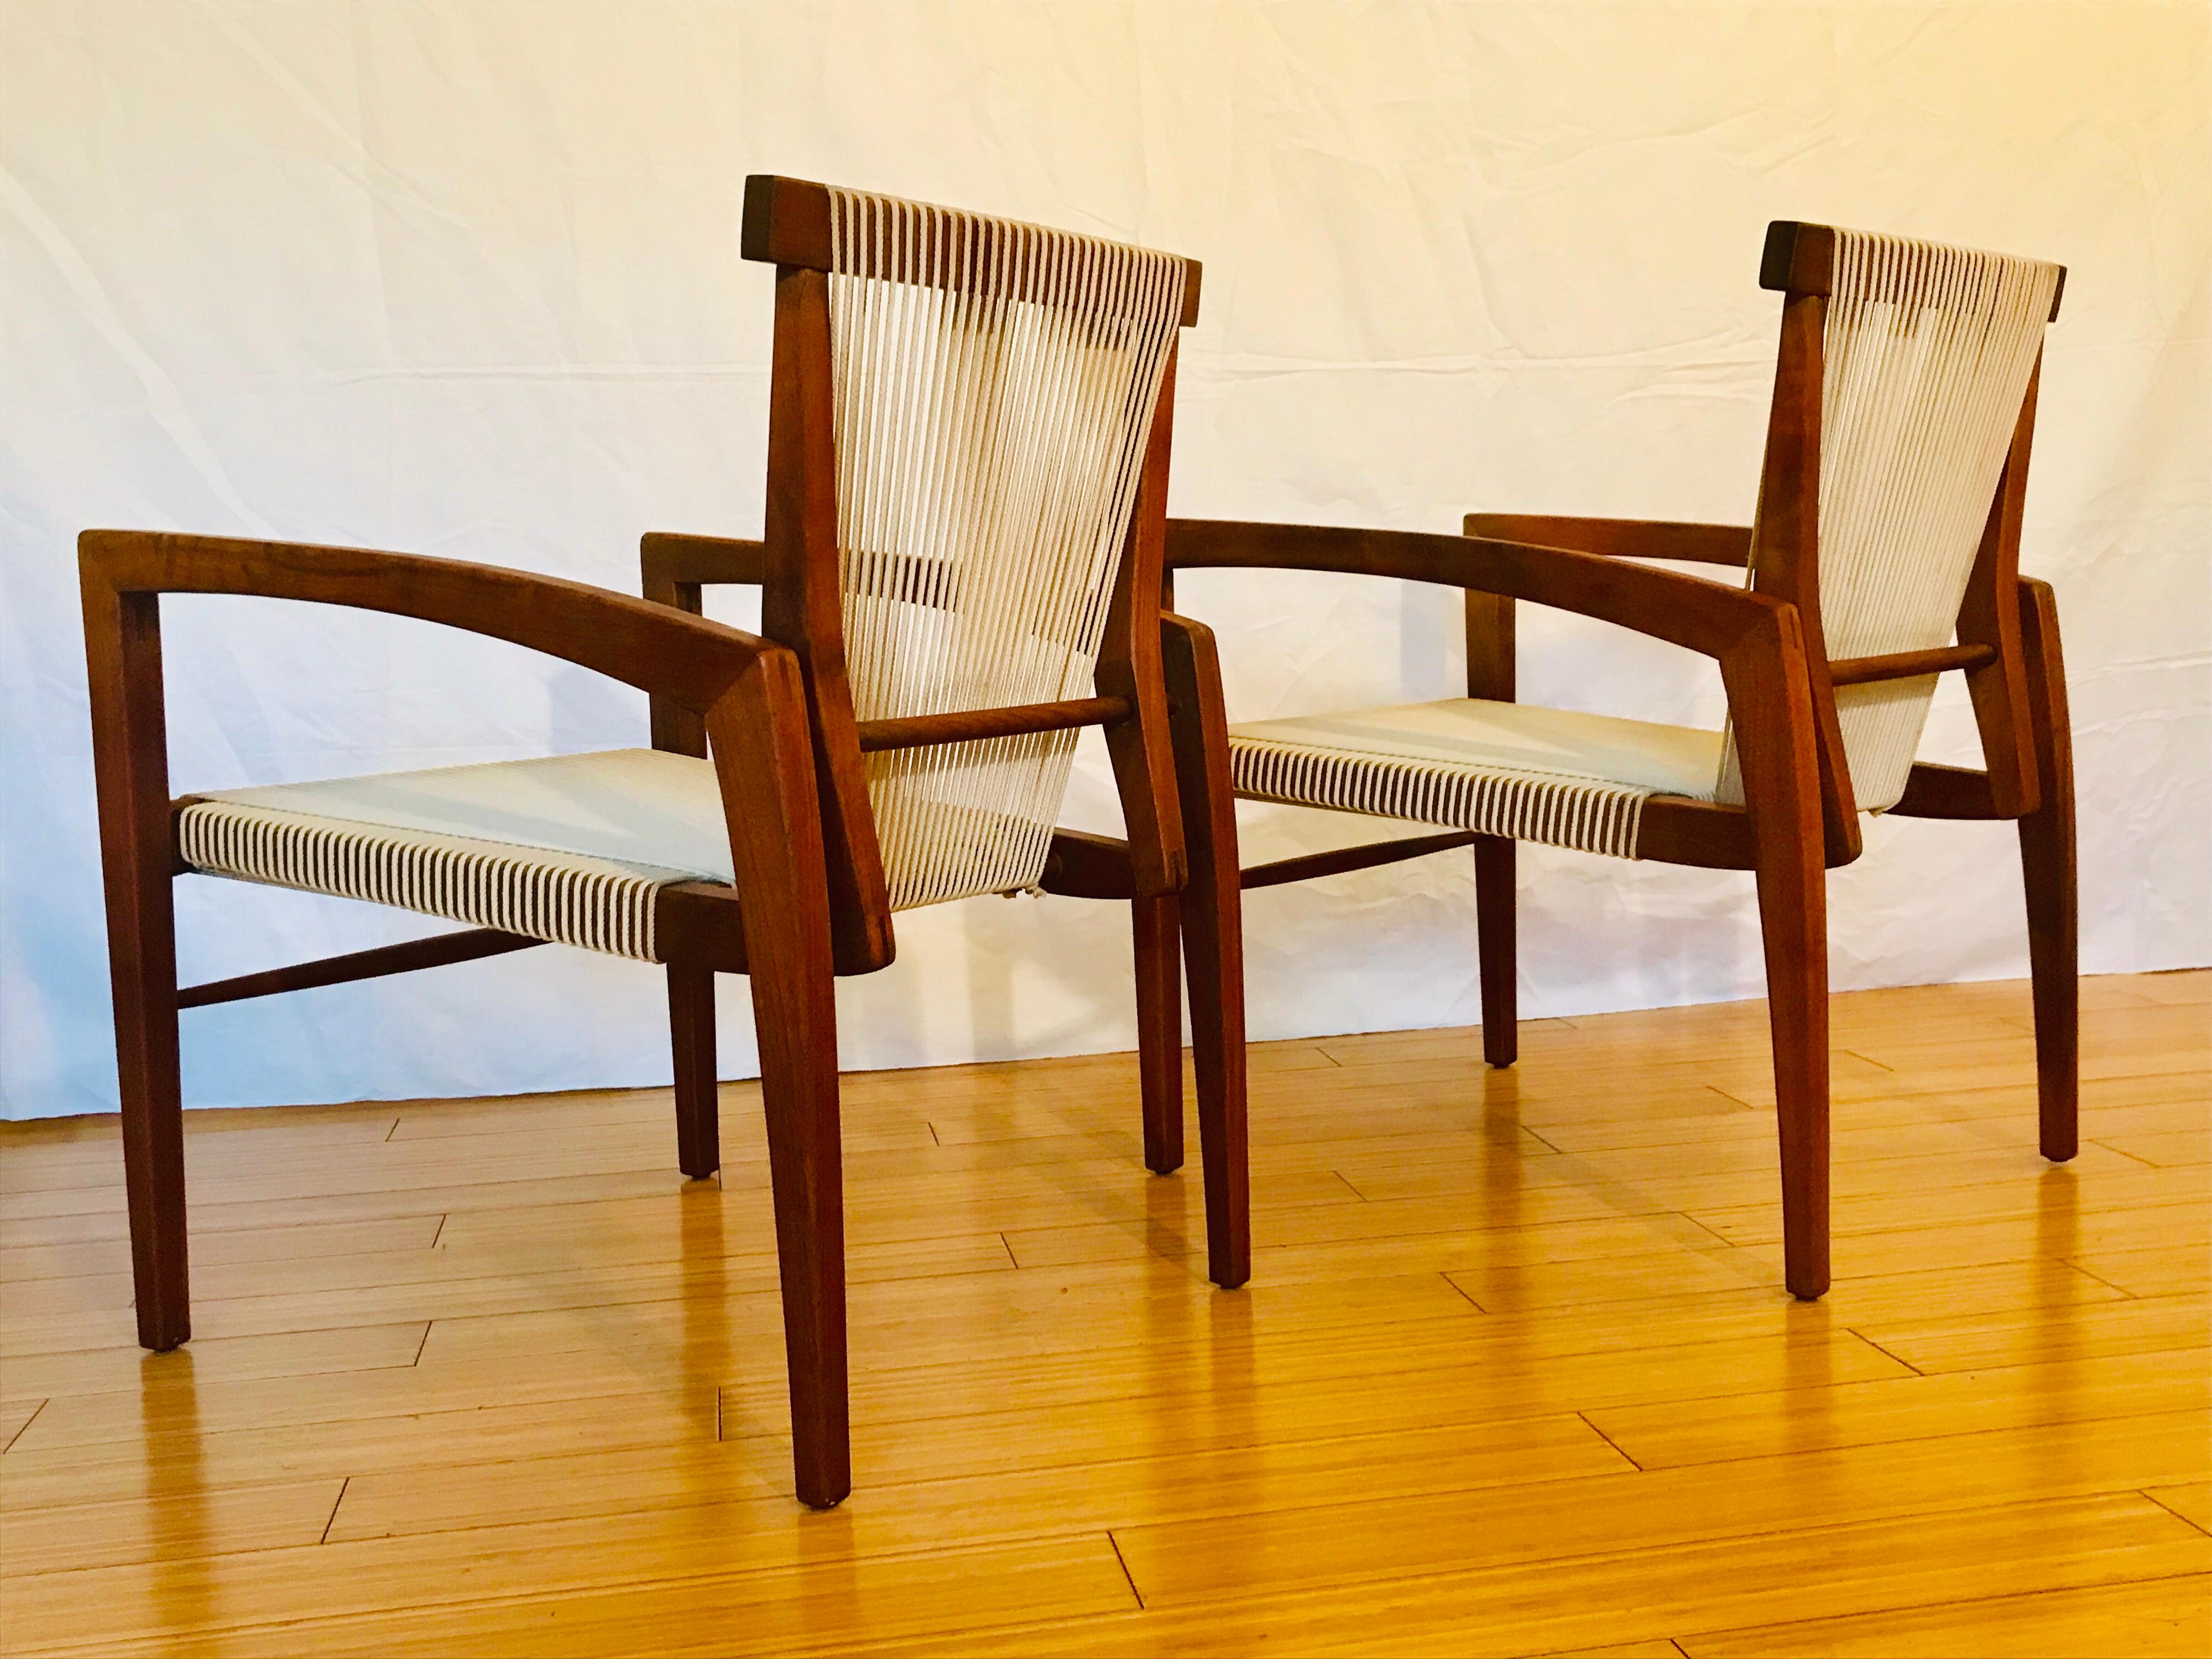 Irving Sabo Studio Craft Design Wood + String Chairs For Sale 2